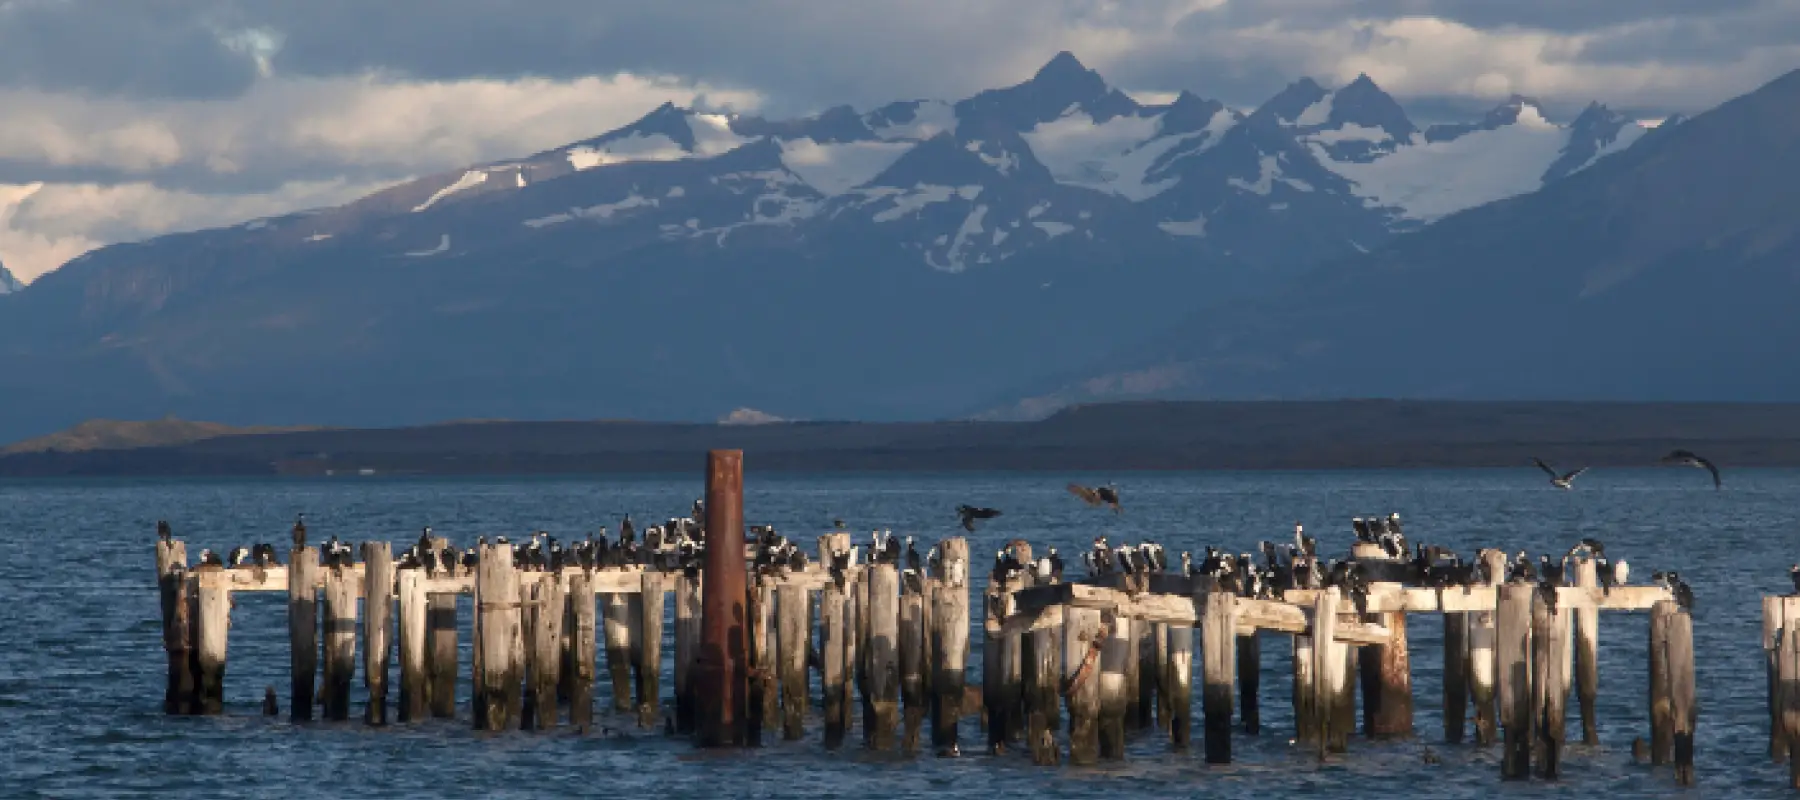 Day 1 - Puerto Natales - Guided Patagonia Tours